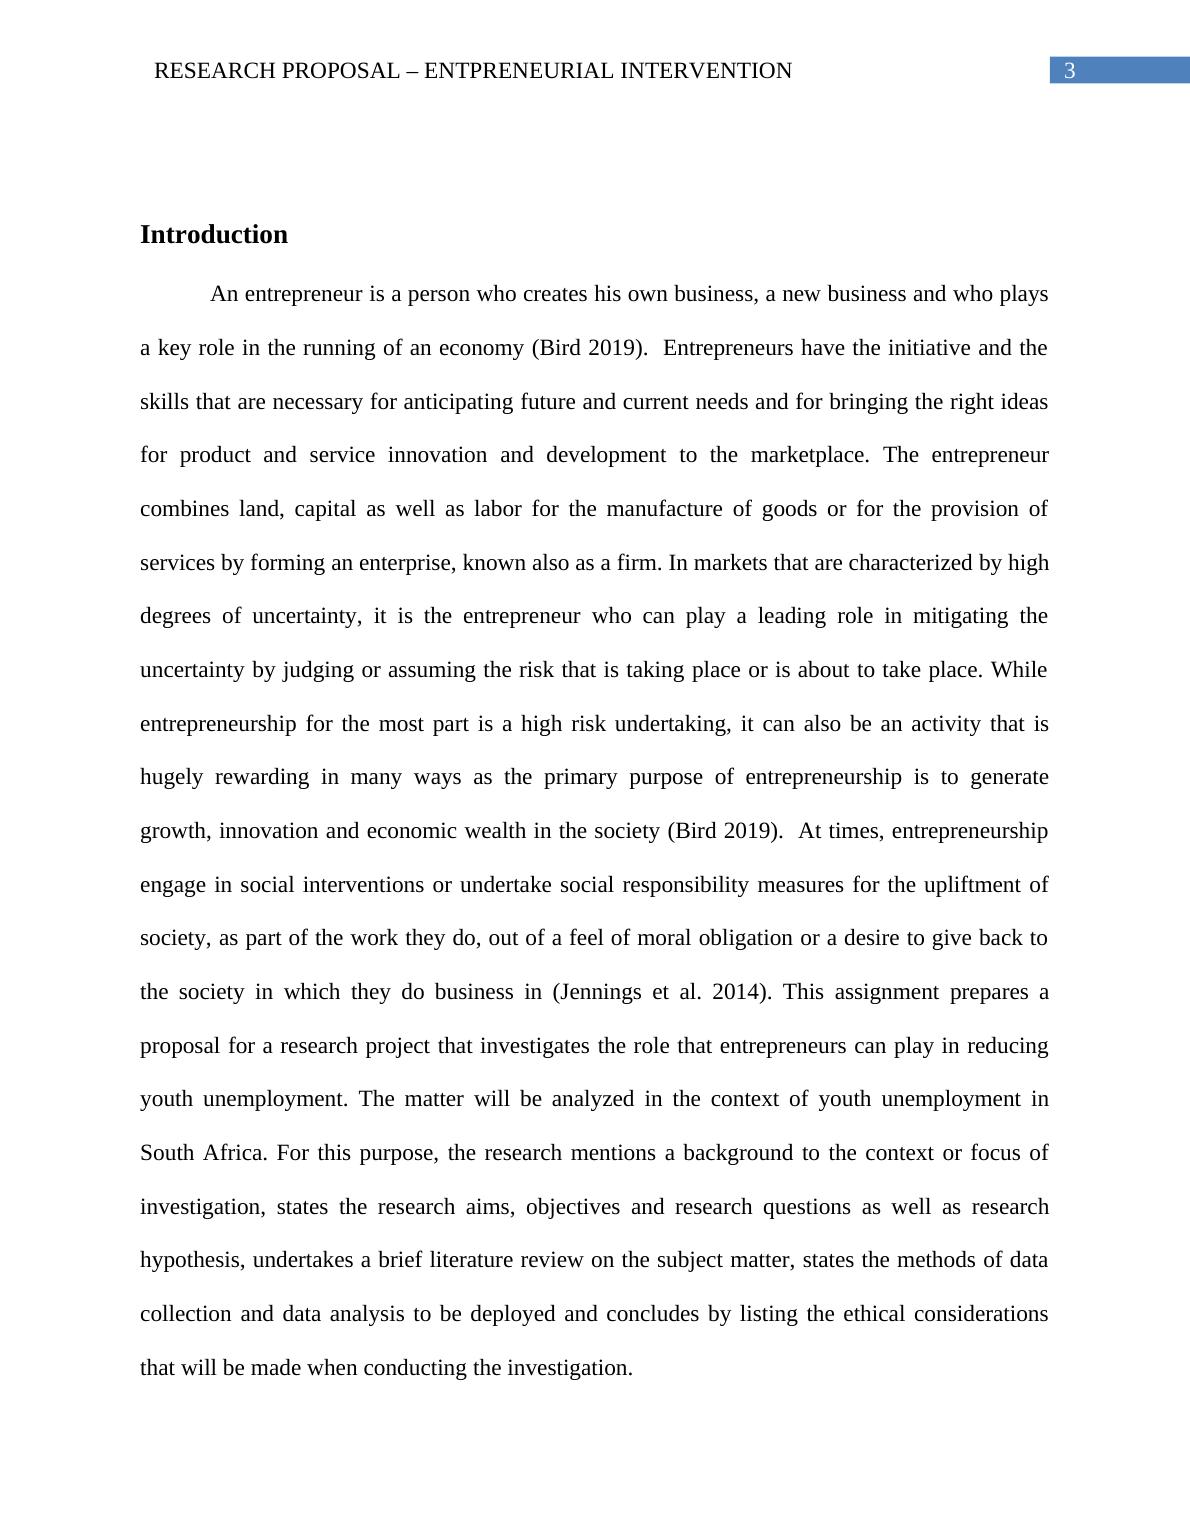 Research Proposal - Entrepreneurial Intervention_4